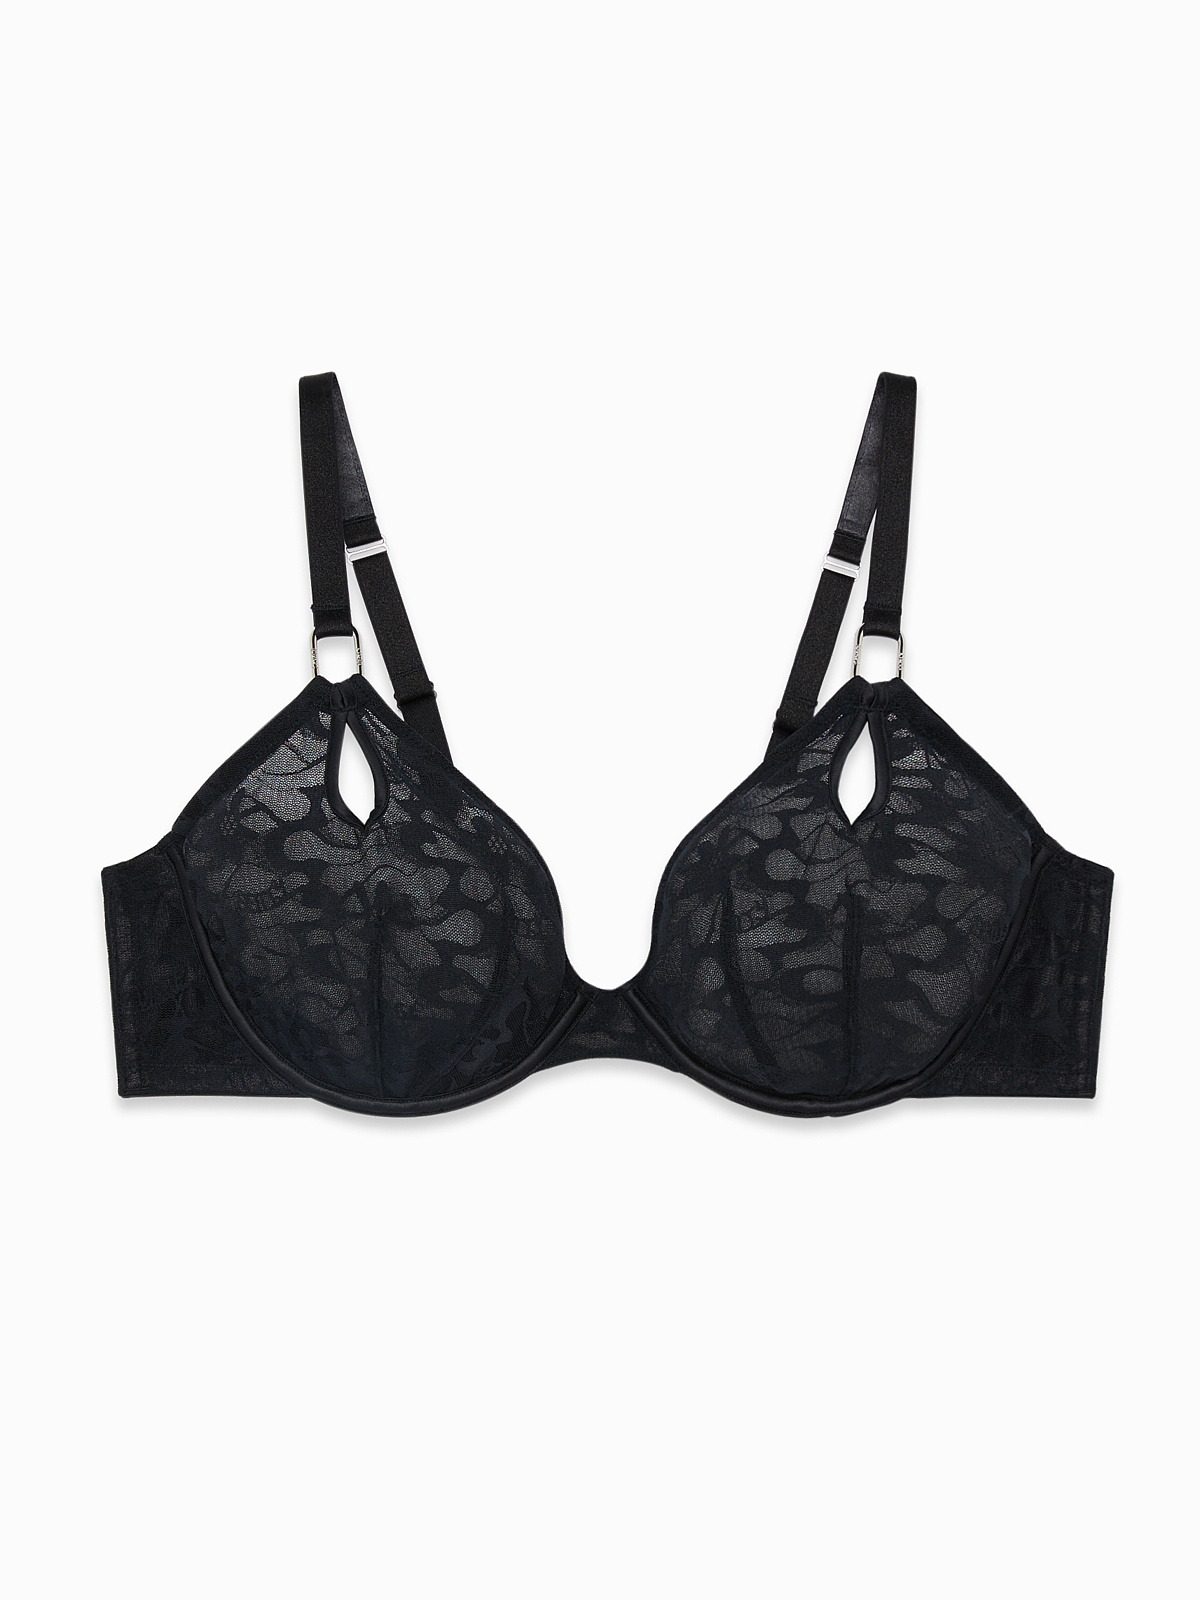 Savage x Fenty Black Disco Lace Push Up Bra underwire padded 36DD 36 DD 36E  new Size undefined - $25 New With Tags - From Jenny